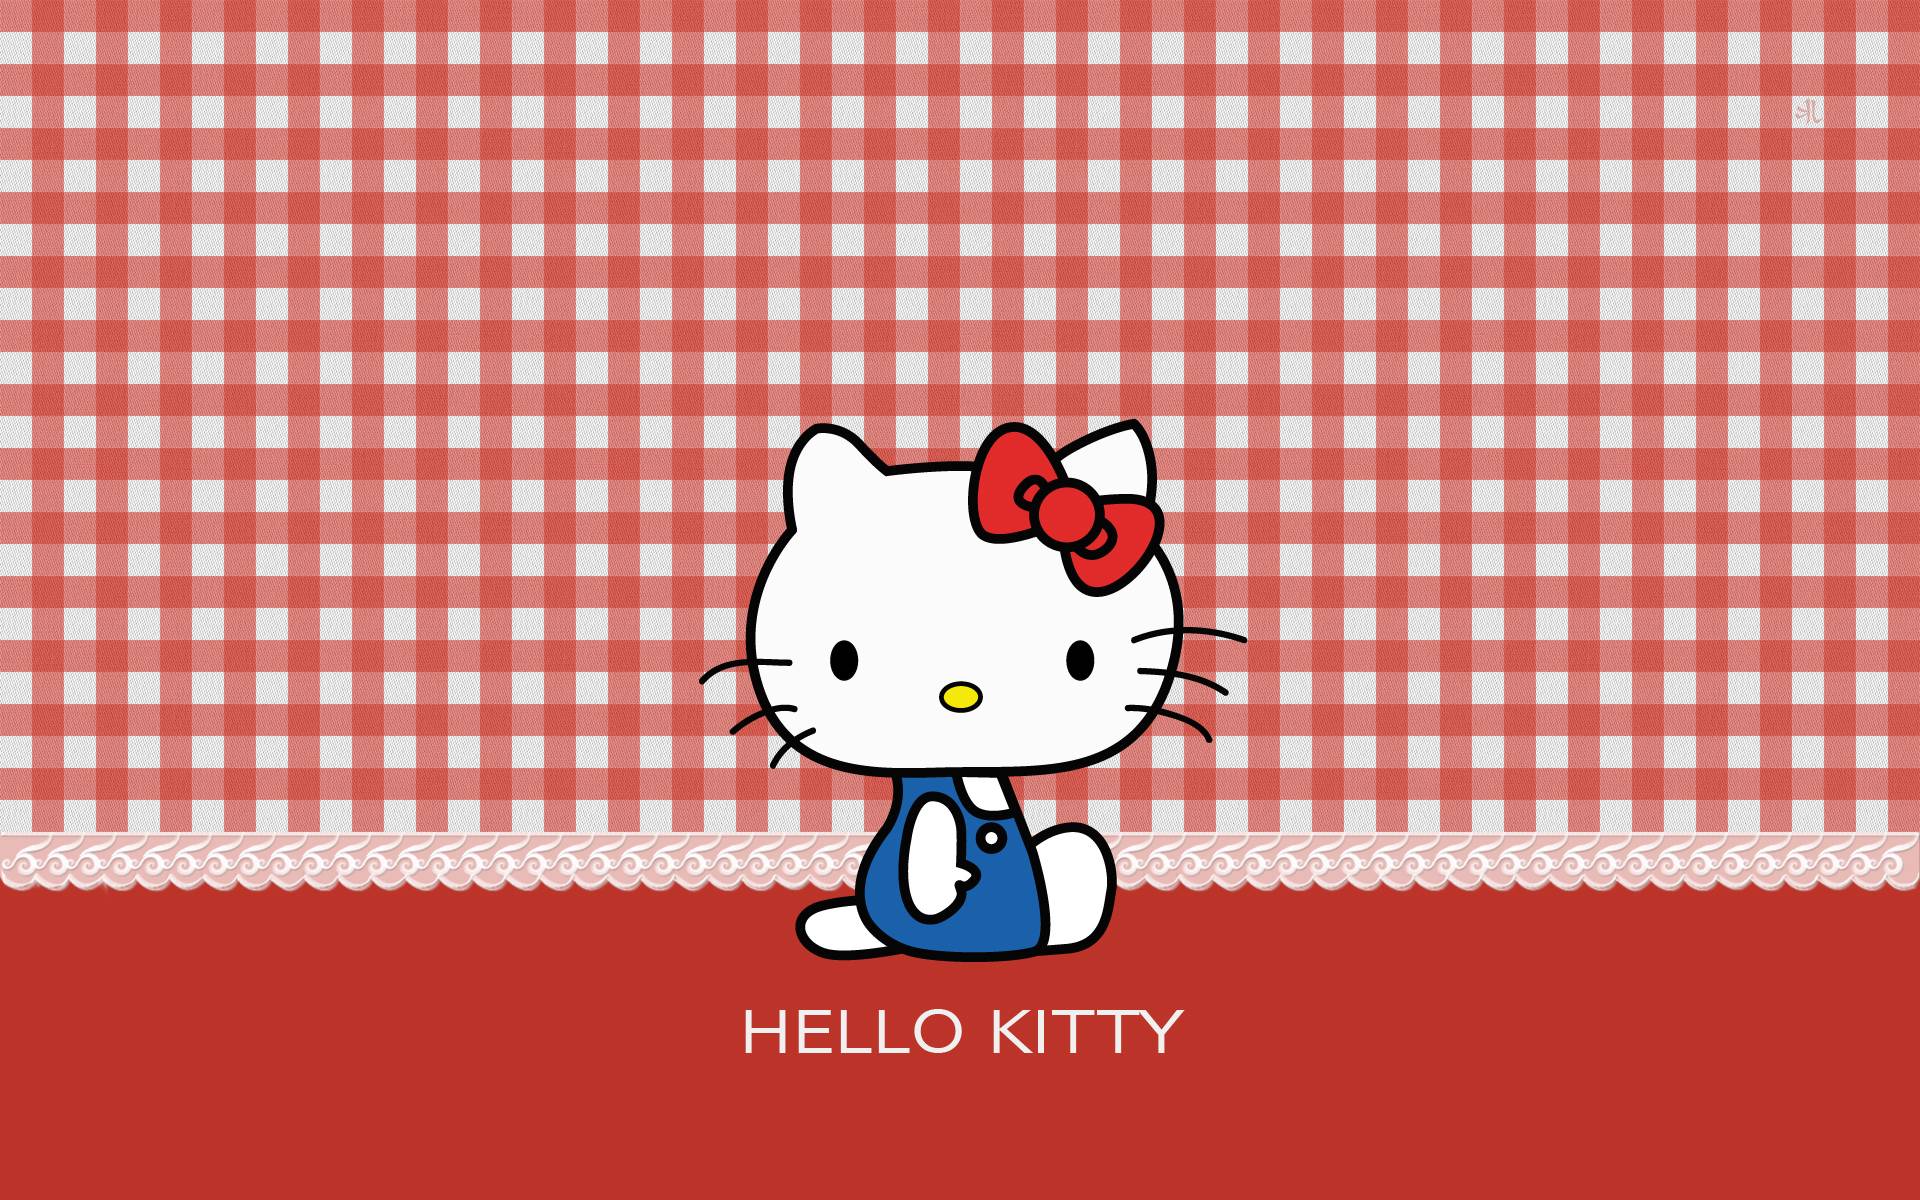 Hello Kitty Wallpaper Red Background & Wallpaper